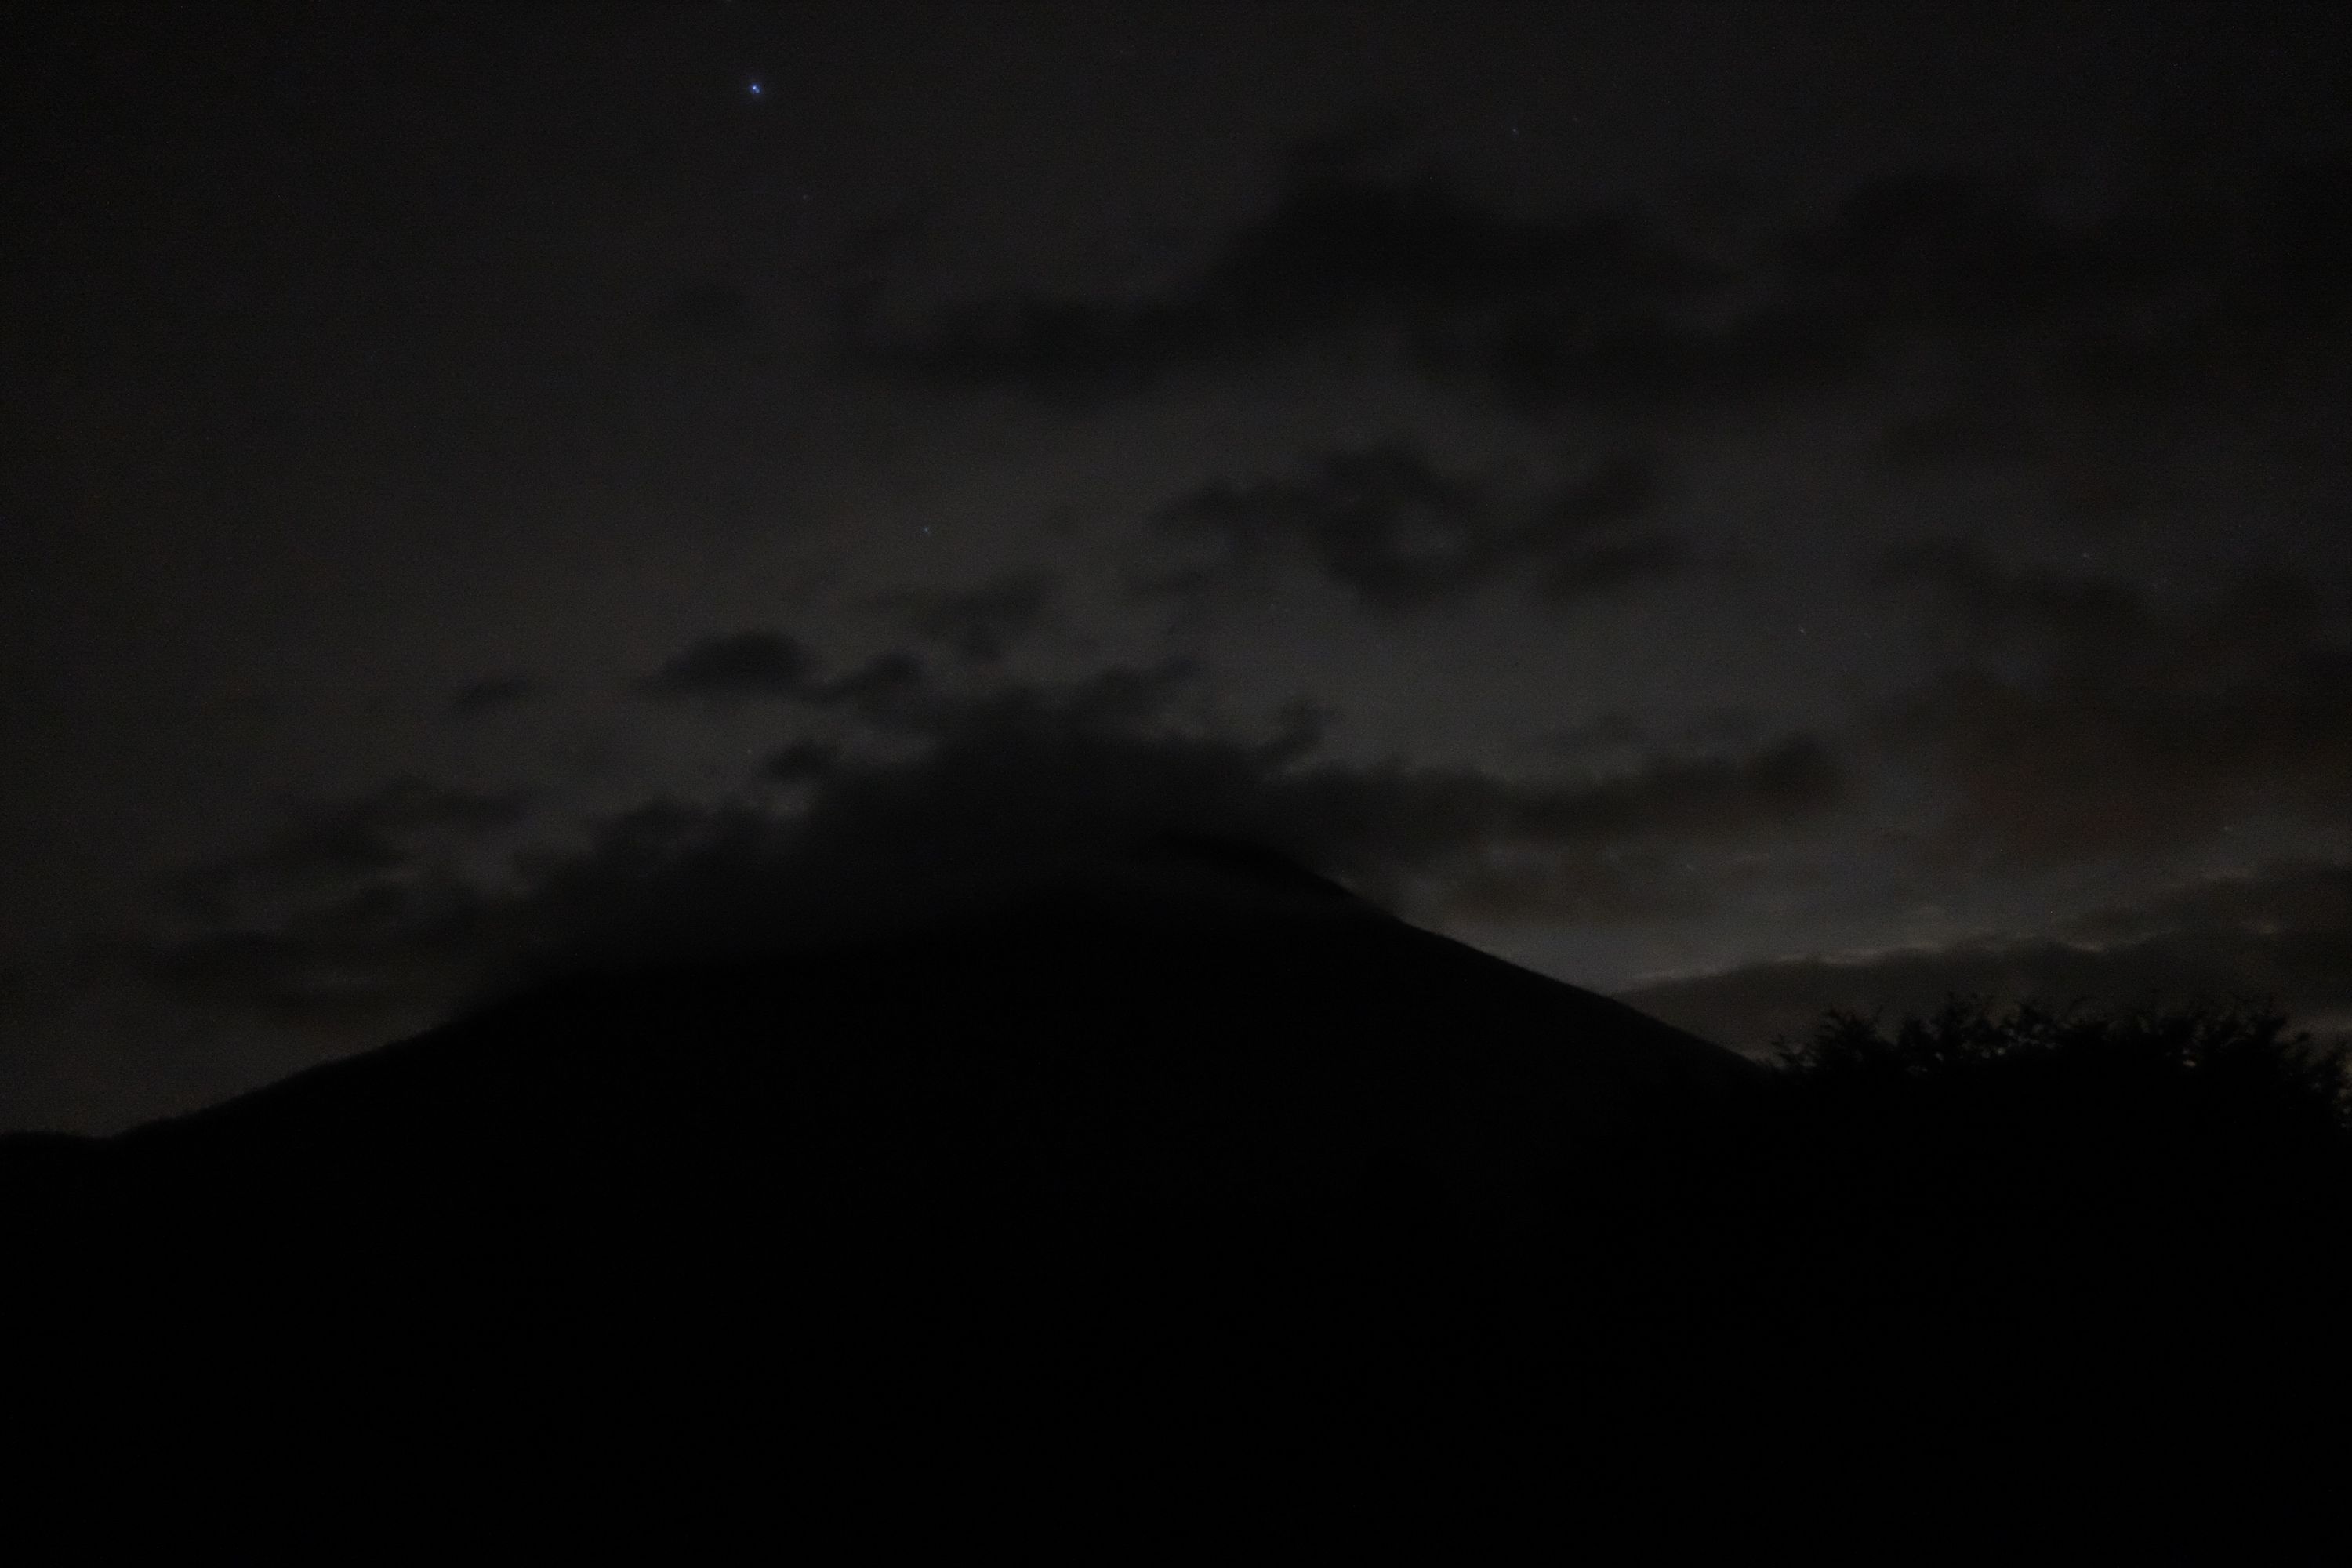 The silhouette of Mount Nantai against the evening sky.